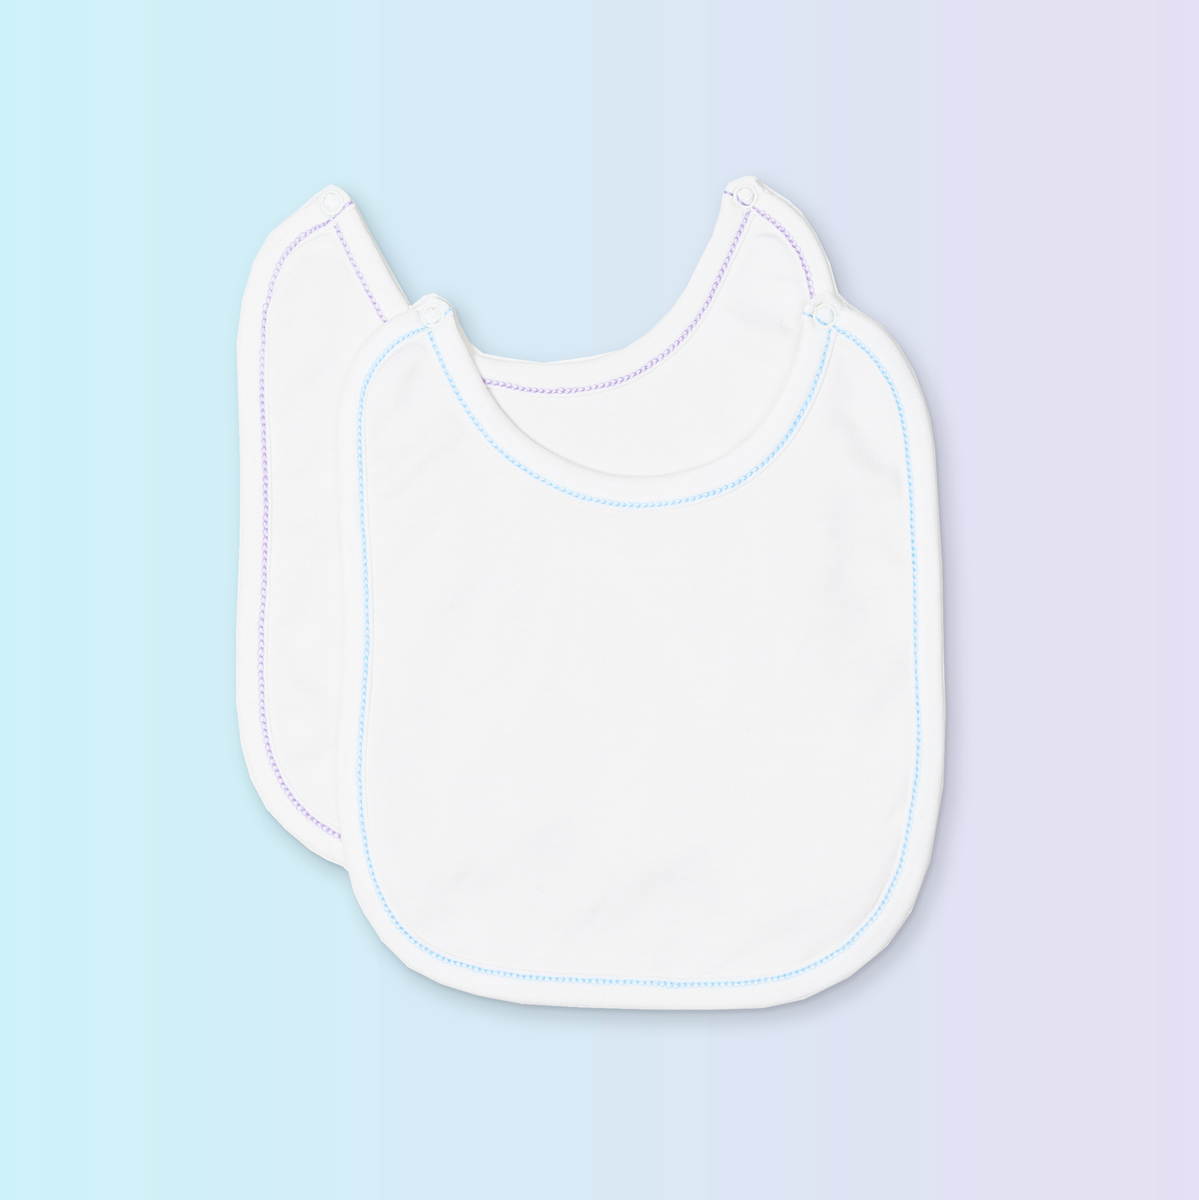 Pack of Bibs - Pack of two bibs in an assortment of colors